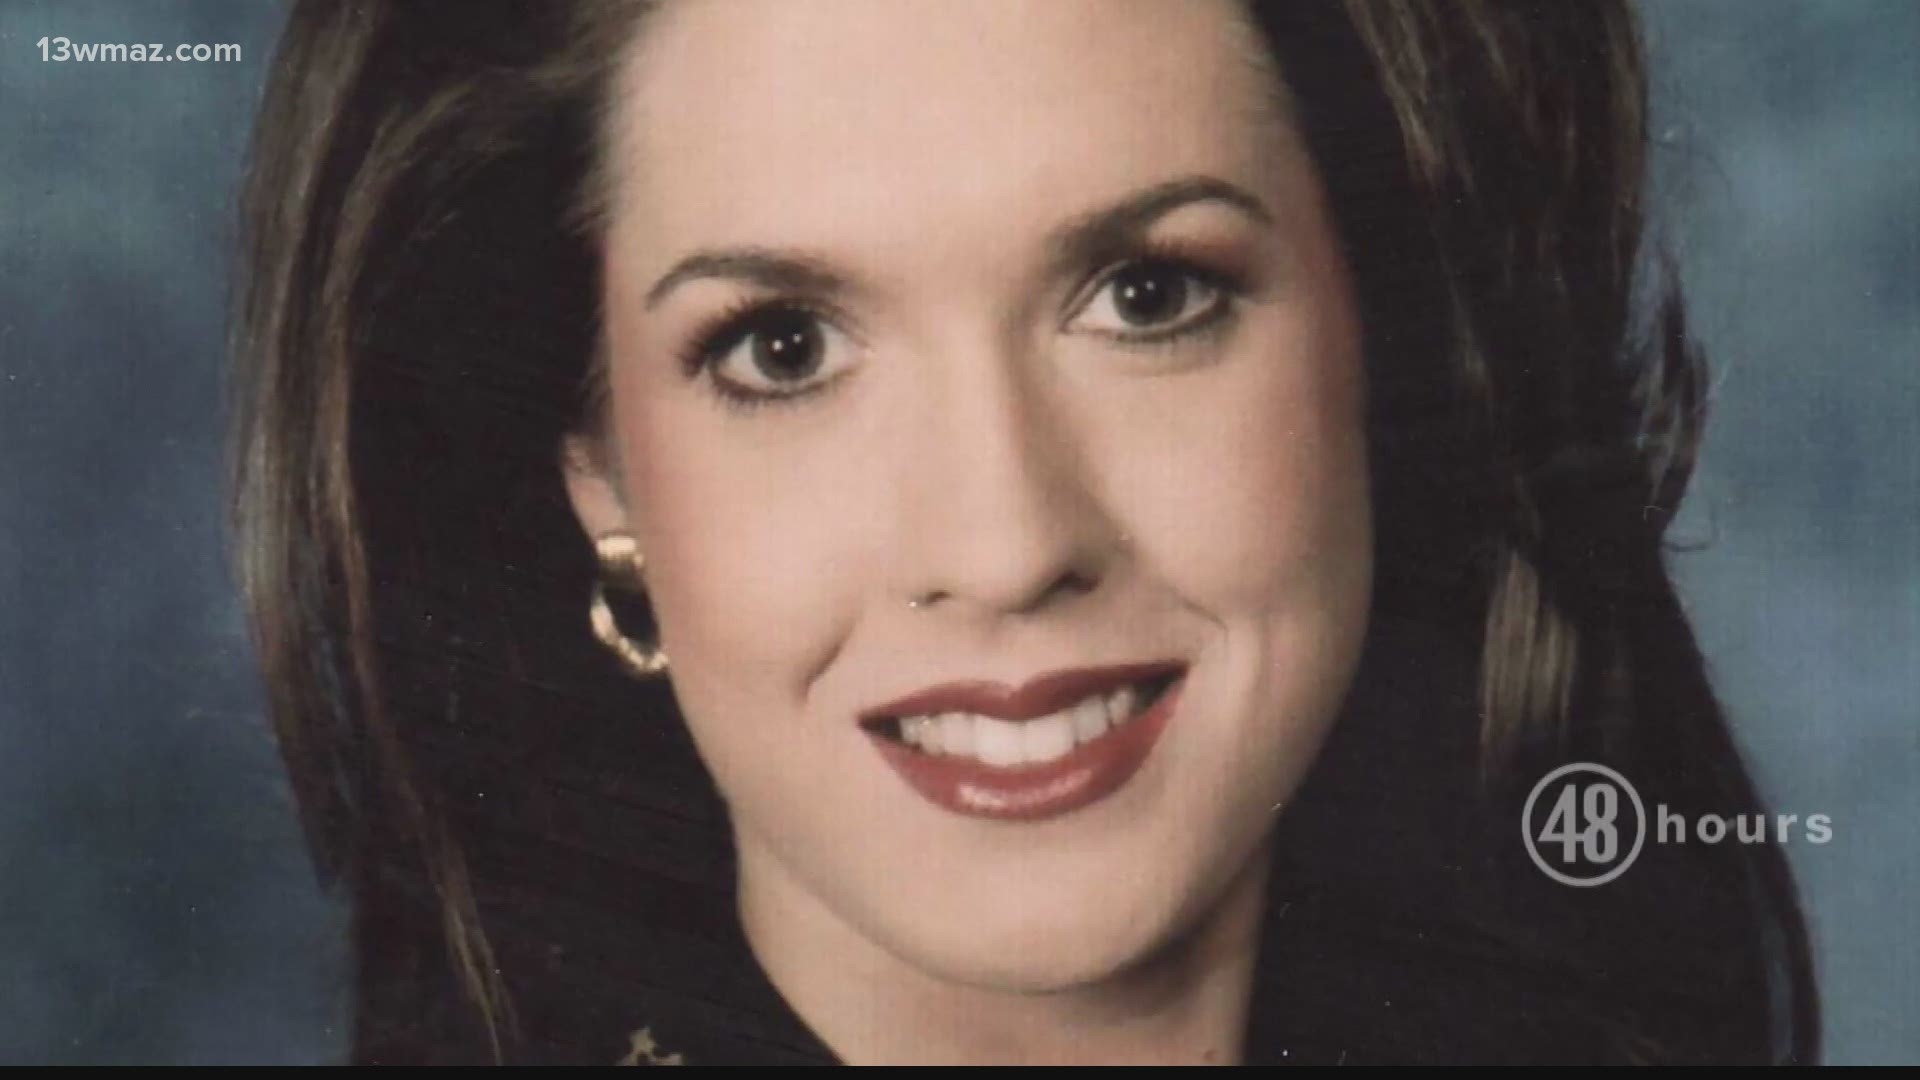 Peter Van Sant takes an in-depth look at the disappearance of teacher and former beauty queen Tara Grinstead, who went missing from Ocilla, Georgia, in 2005.